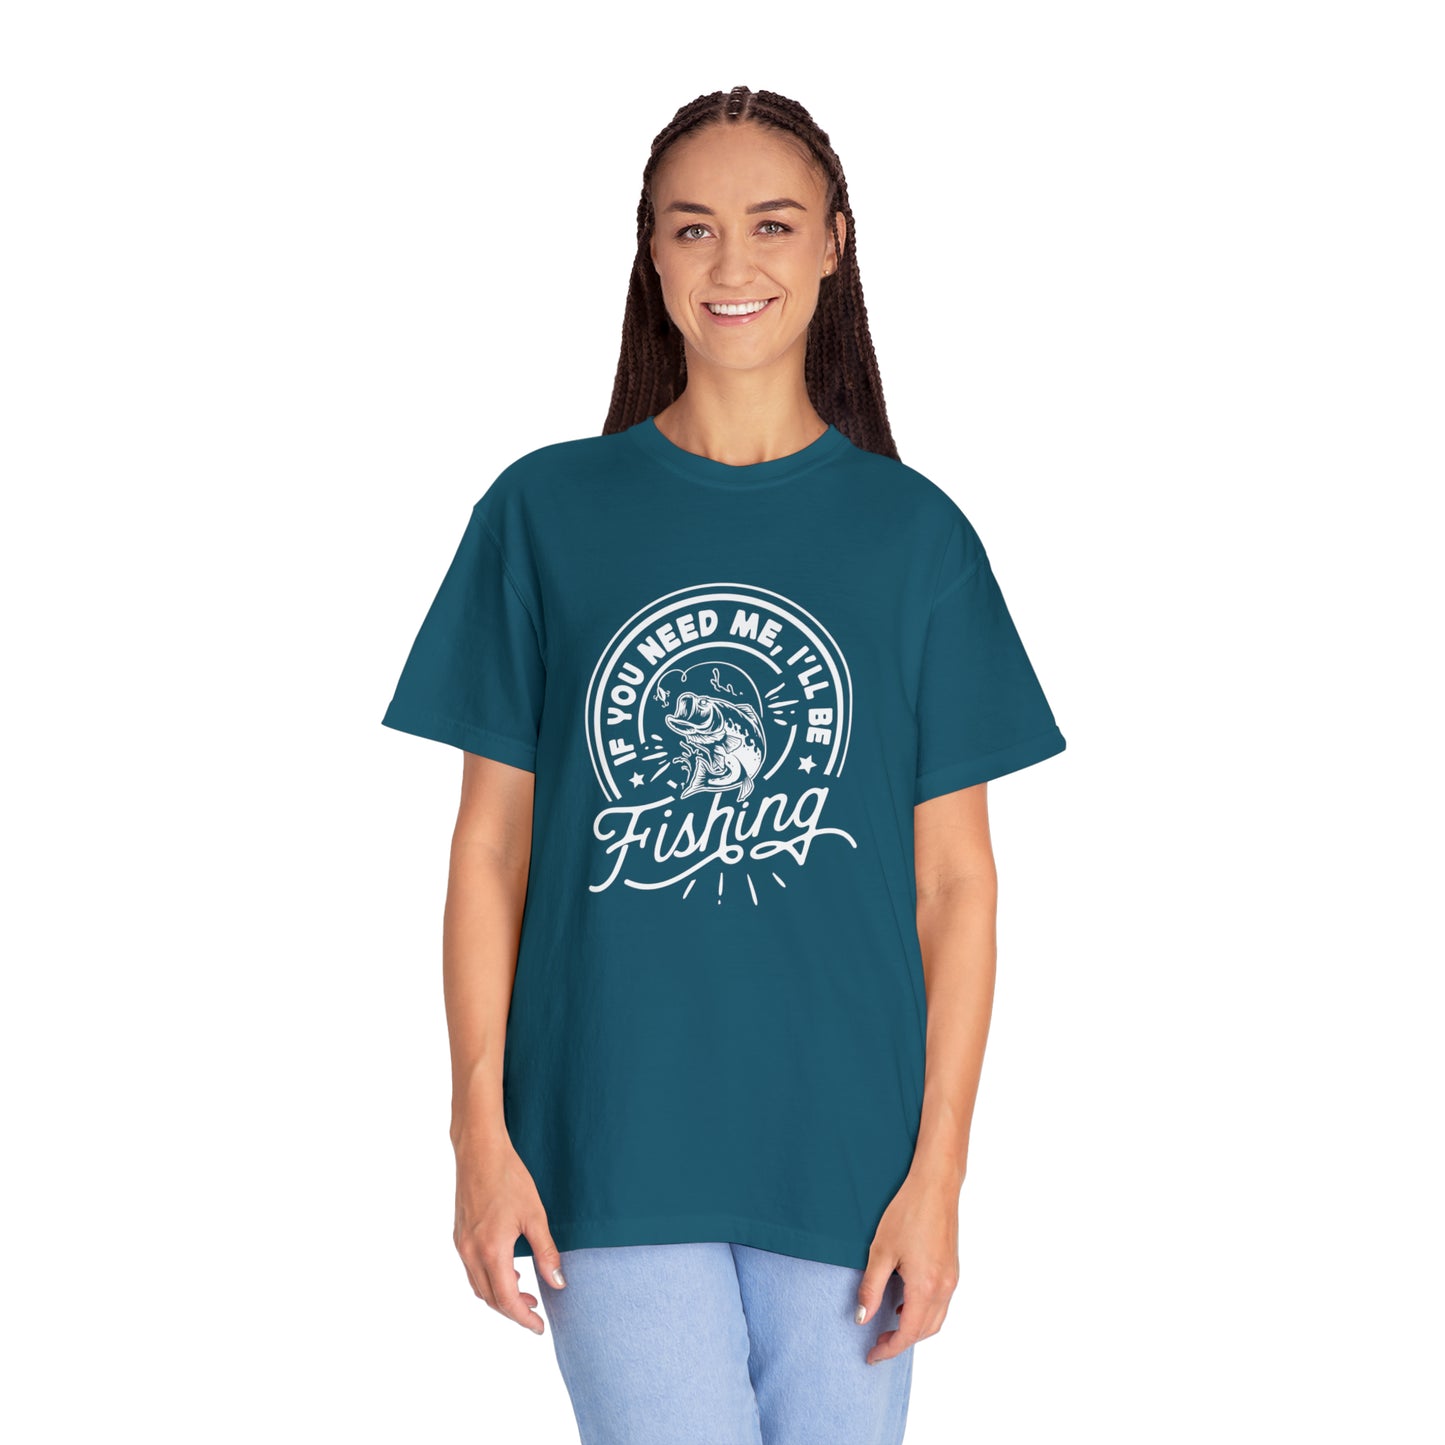 Hooked on Fishing: Find Me by the Water T-Shirt